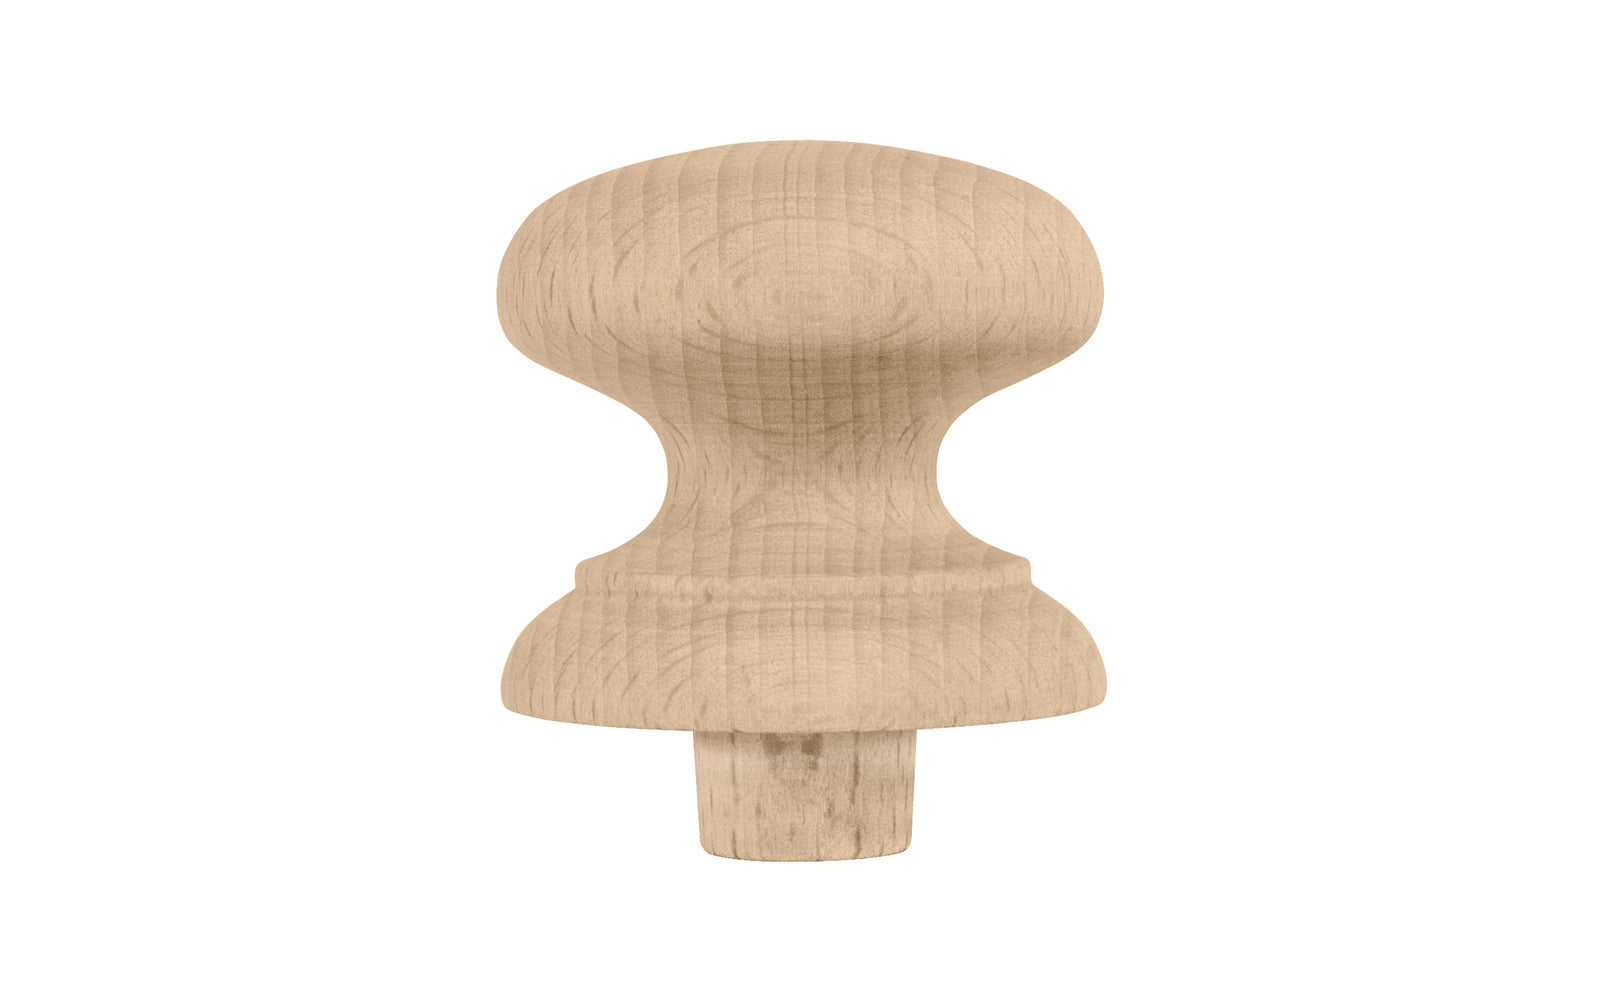 Traditional & Classic Shaker Beech Knob with Tenon. Made of unfinished solid beech wood, these wood knobs have a smooth & attractive look & feel. Wooden shaker knob for cabinets, drawers, & furniture. Old style Beechwood Shaker Knob. Wood Shaker Cabinet Knob. 1-7/8